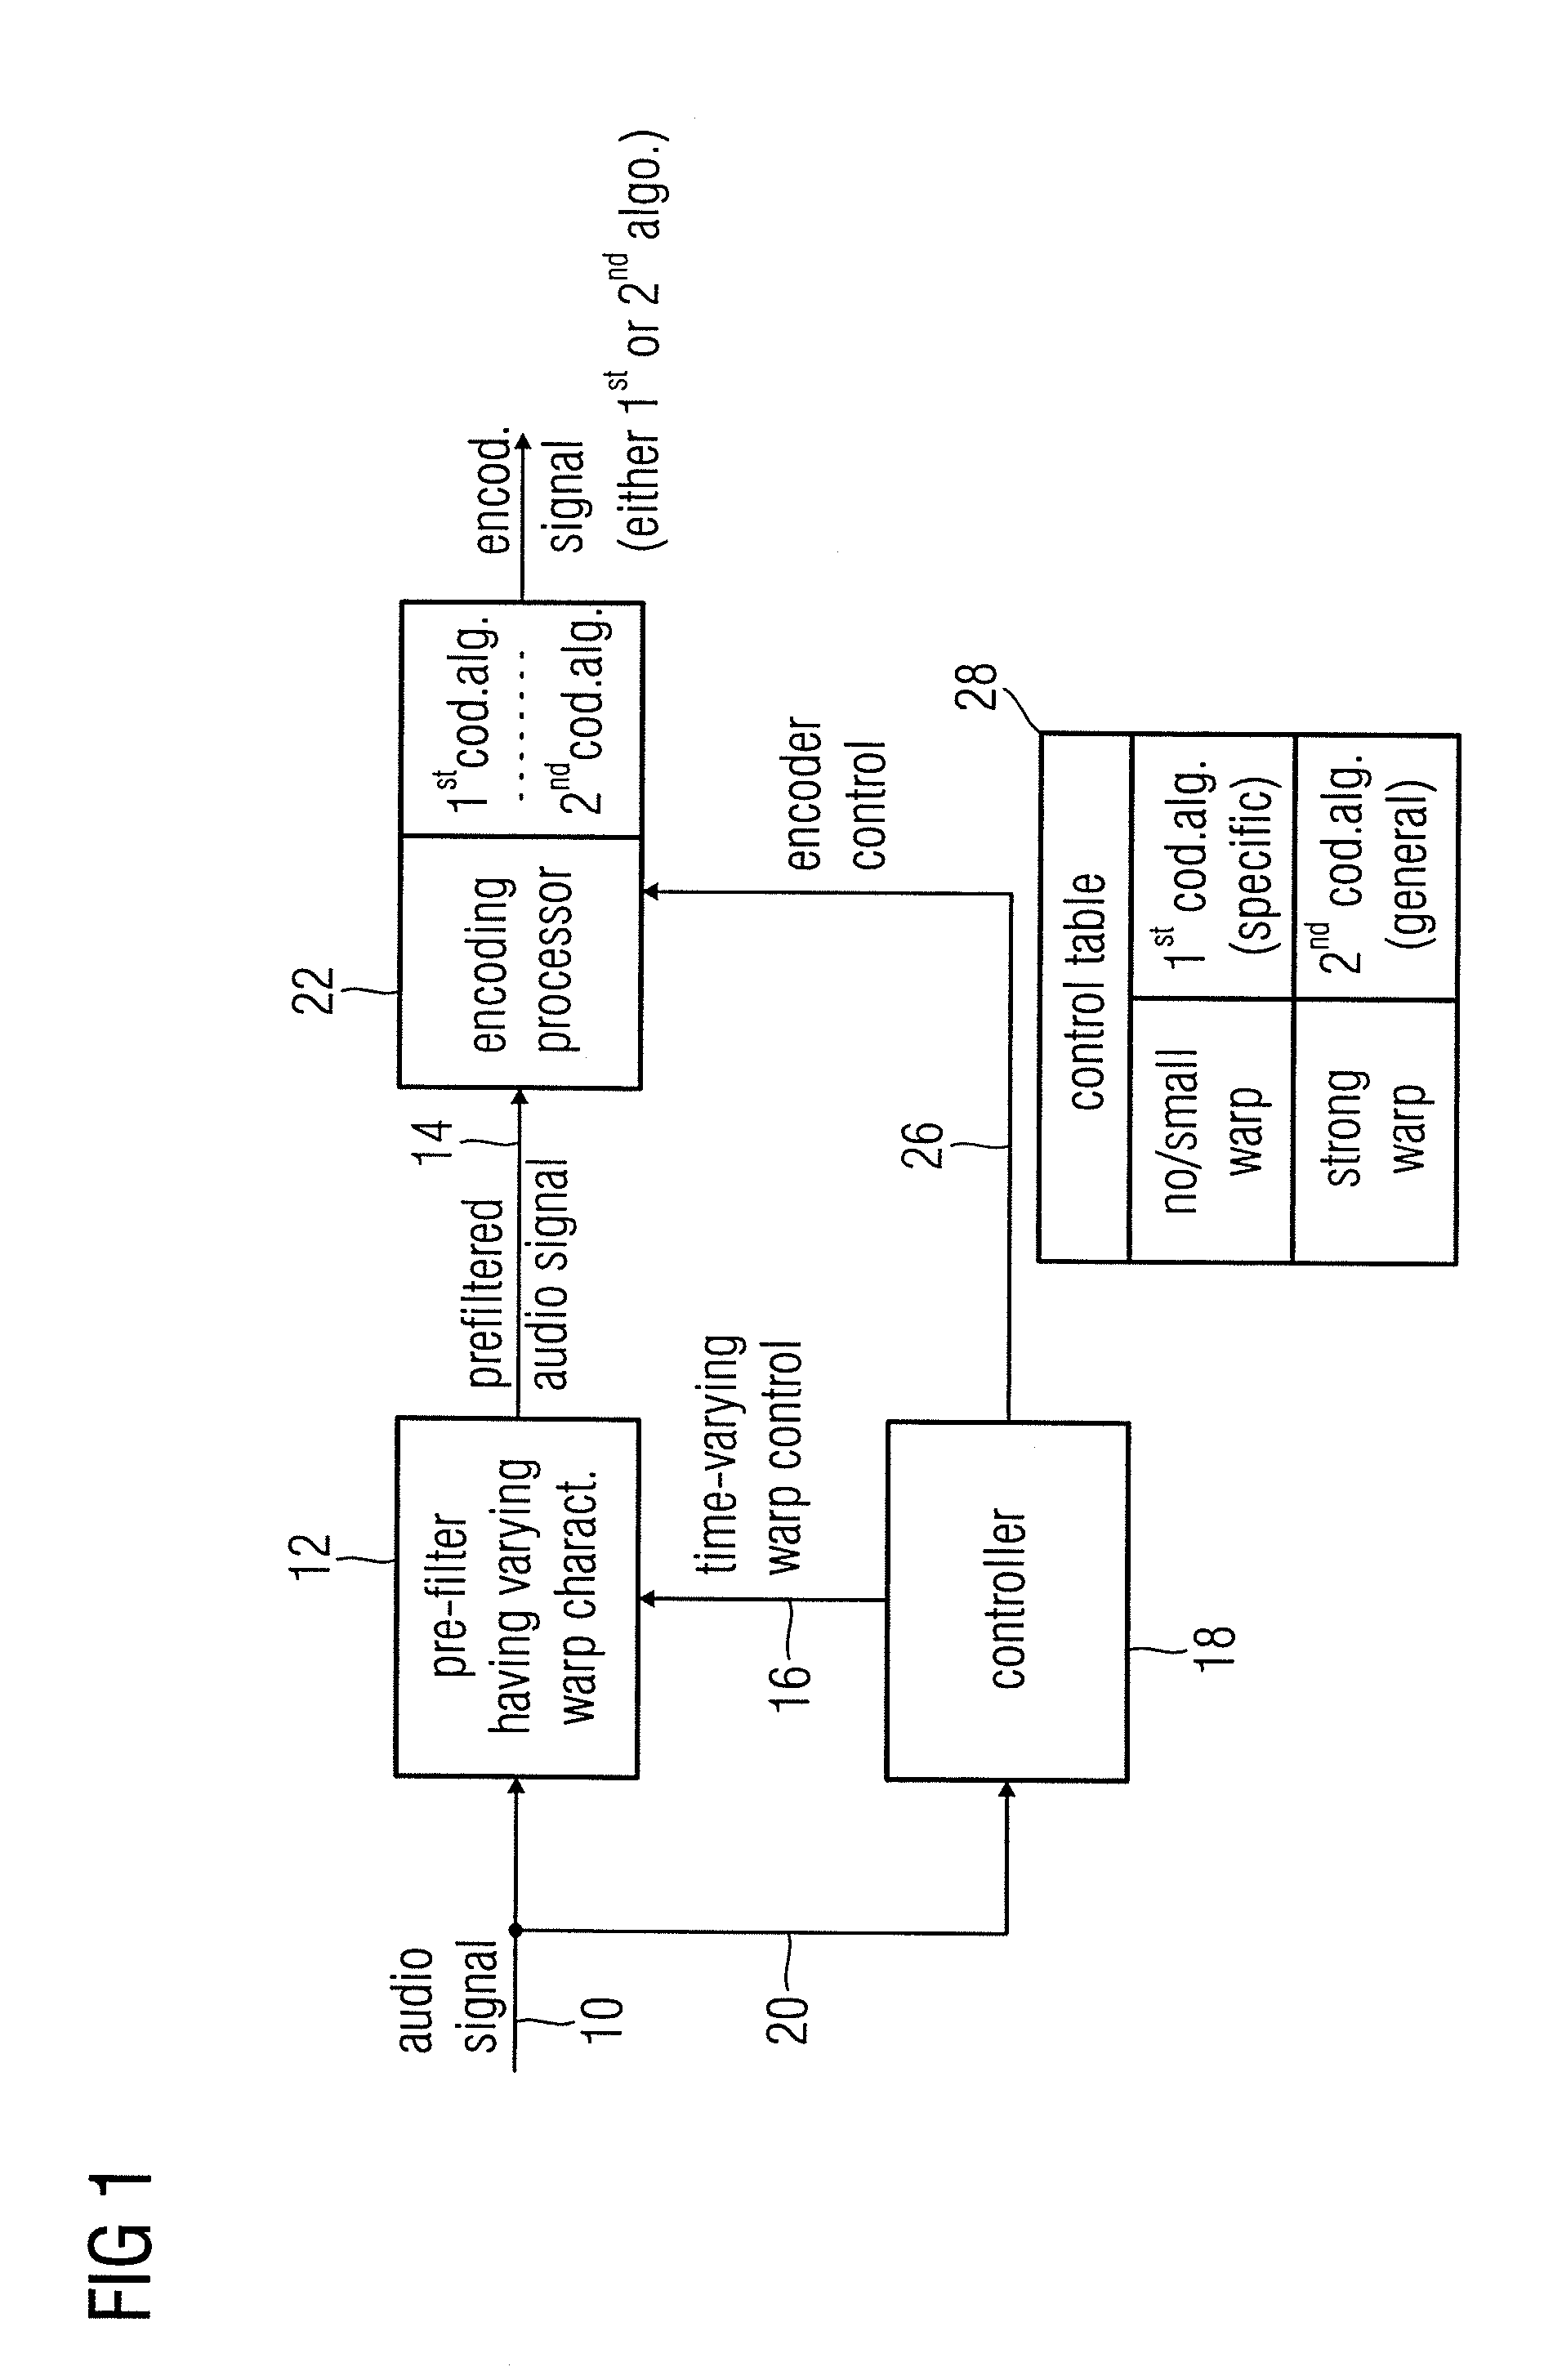 Audio encoder, audio decoder and audio processor having a dynamically variable warping characteristic